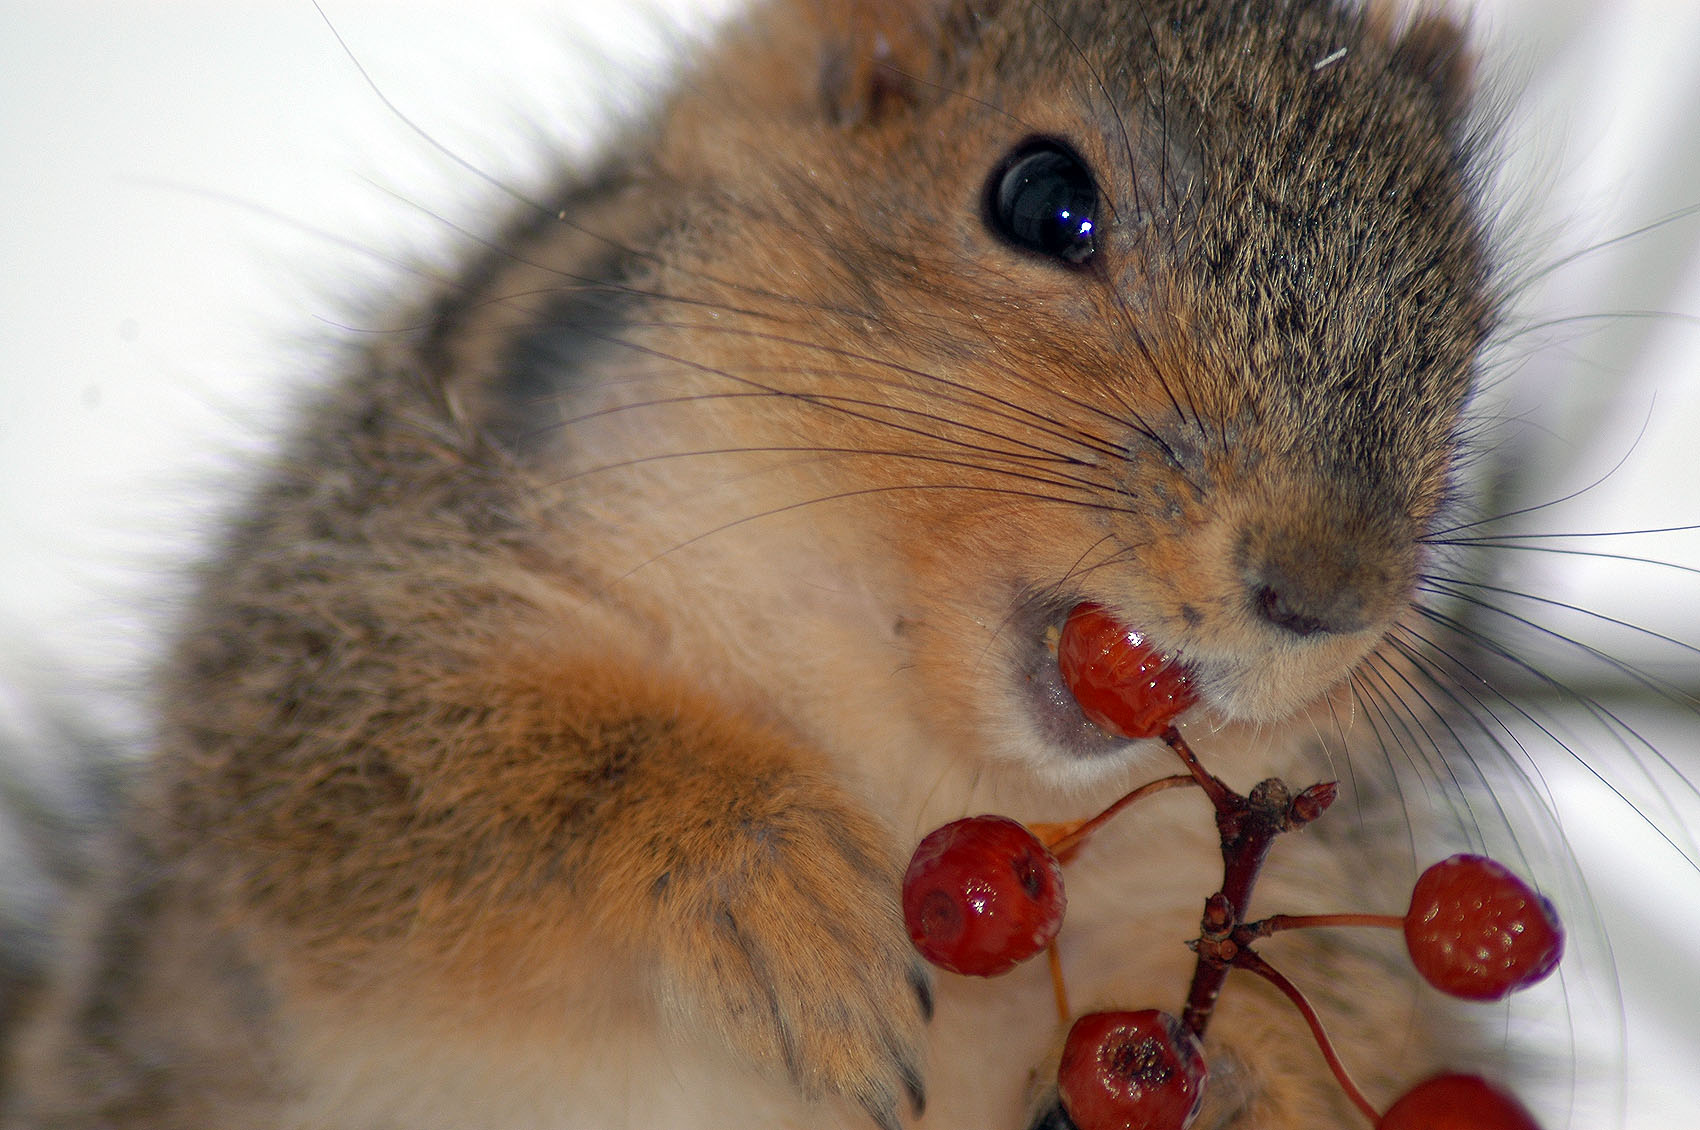 View image - Squirrel Eating a Berry (1) - Abstract Influence